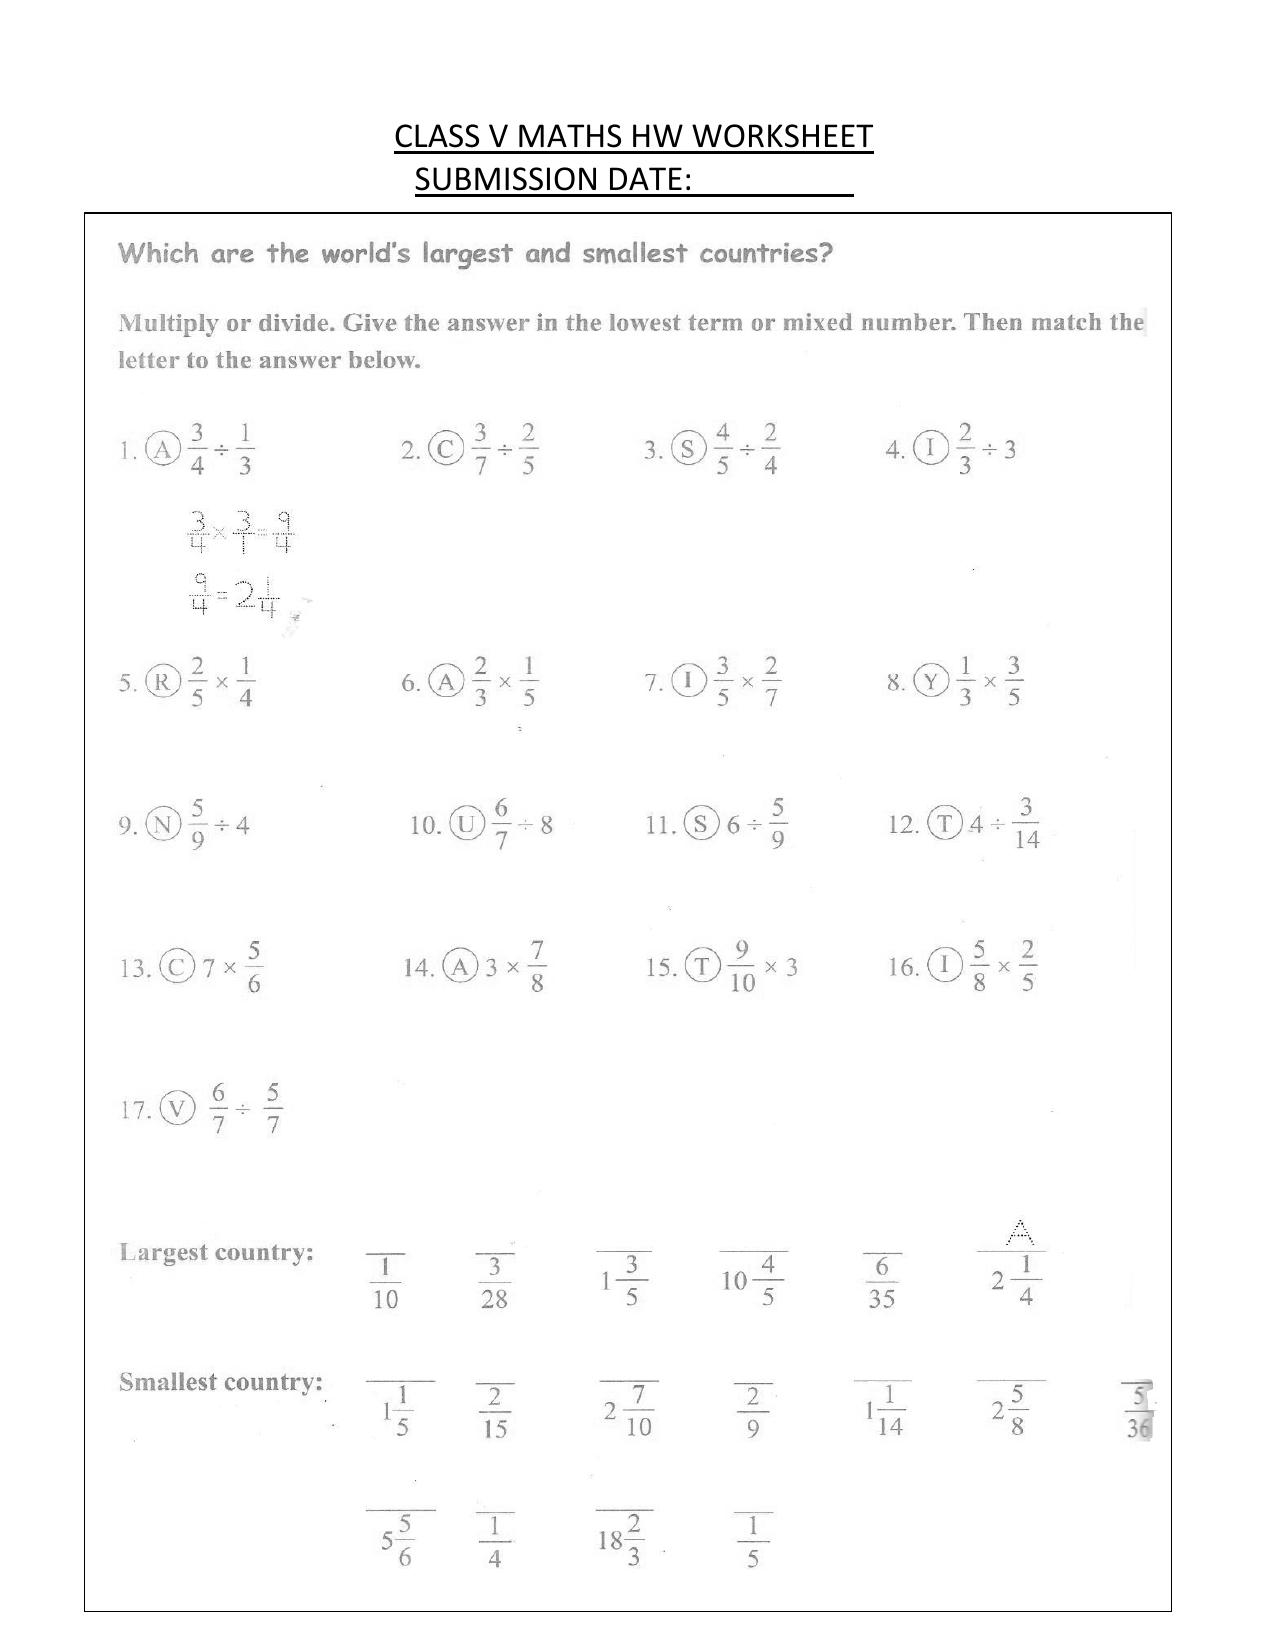 Worksheet for Class 5 Maths Fractions Assignment 3 - Page 1